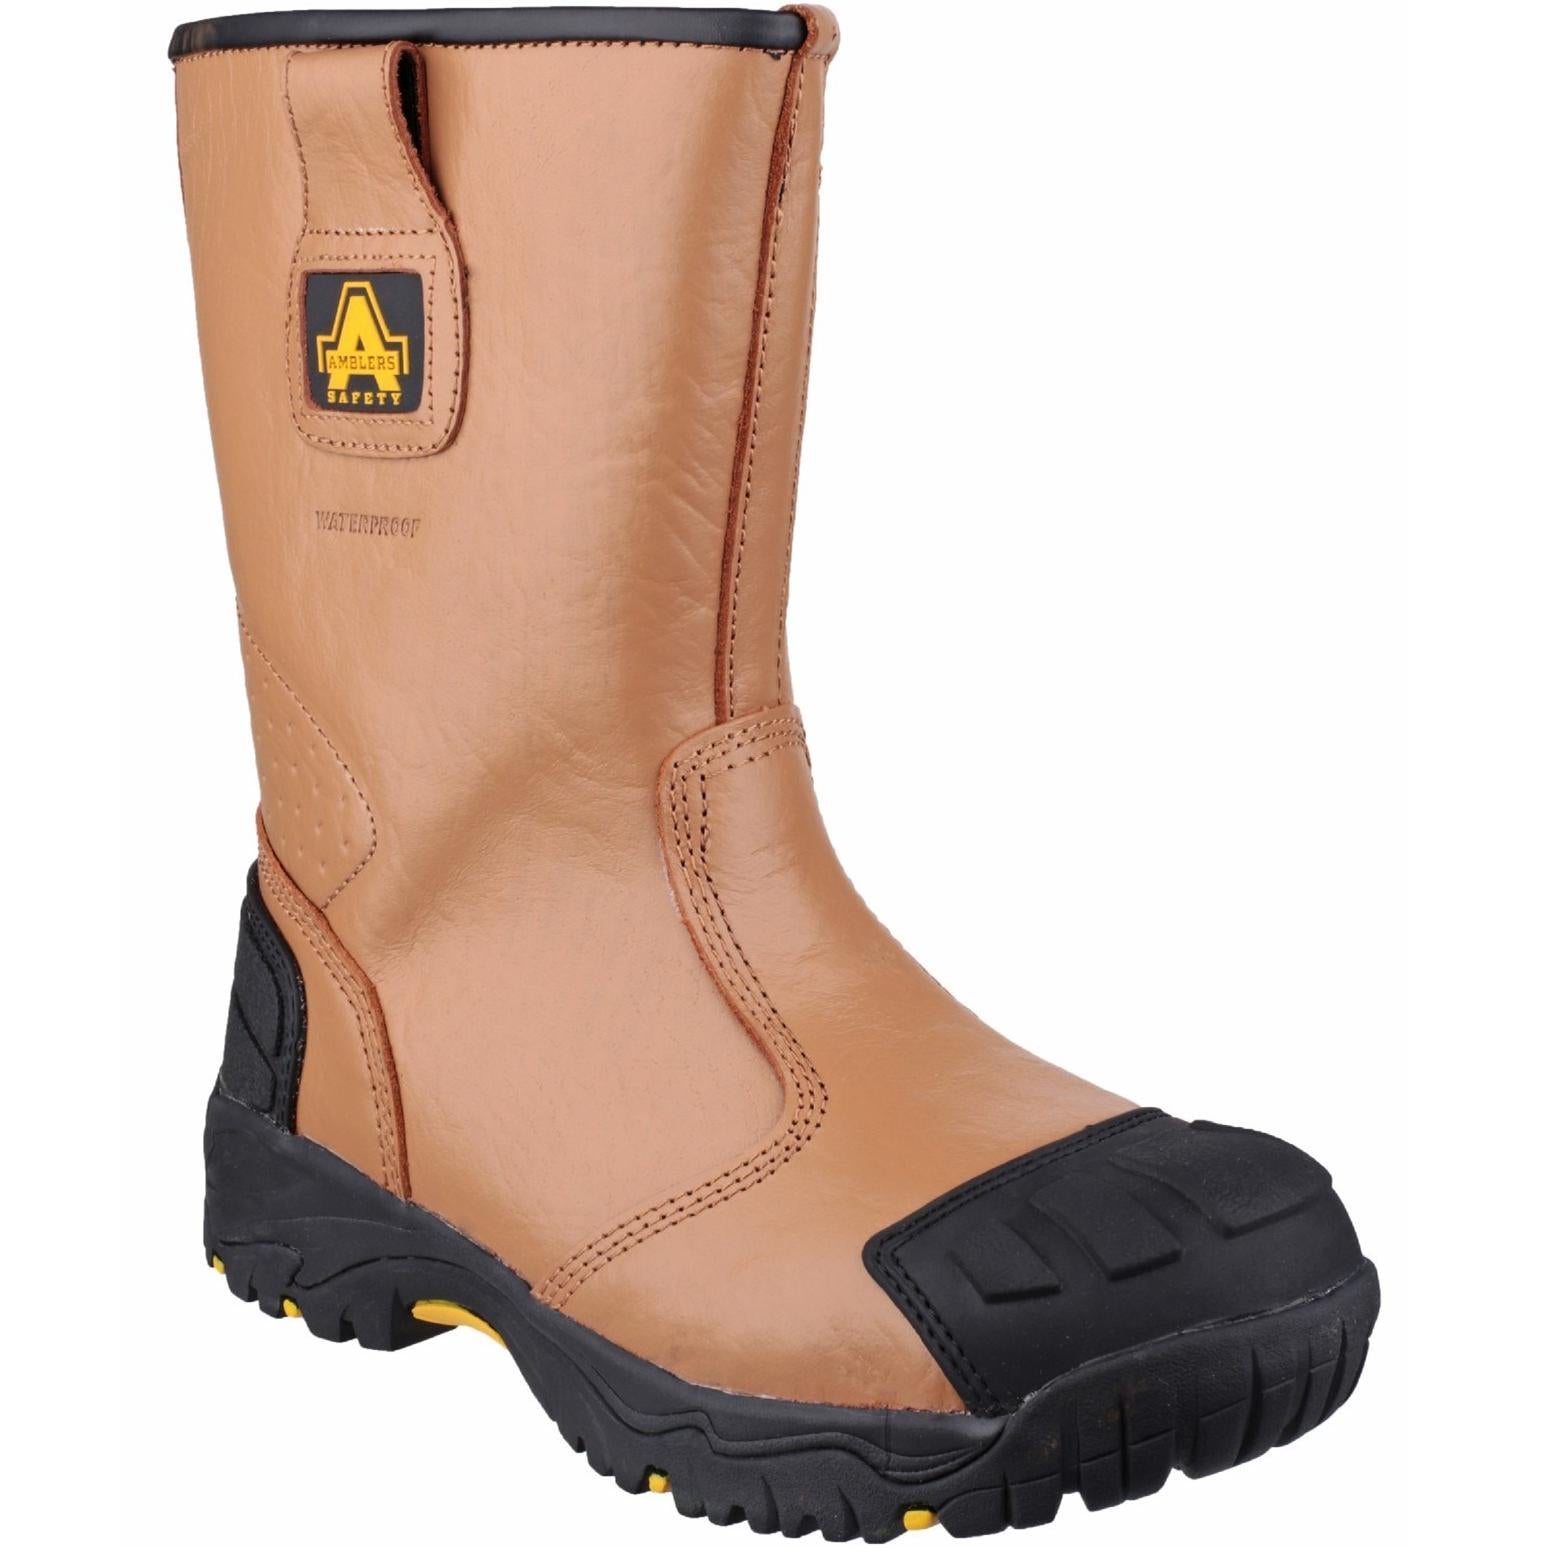 Amblers Safety FS143 Waterproof pull on Safety Rigger Boot